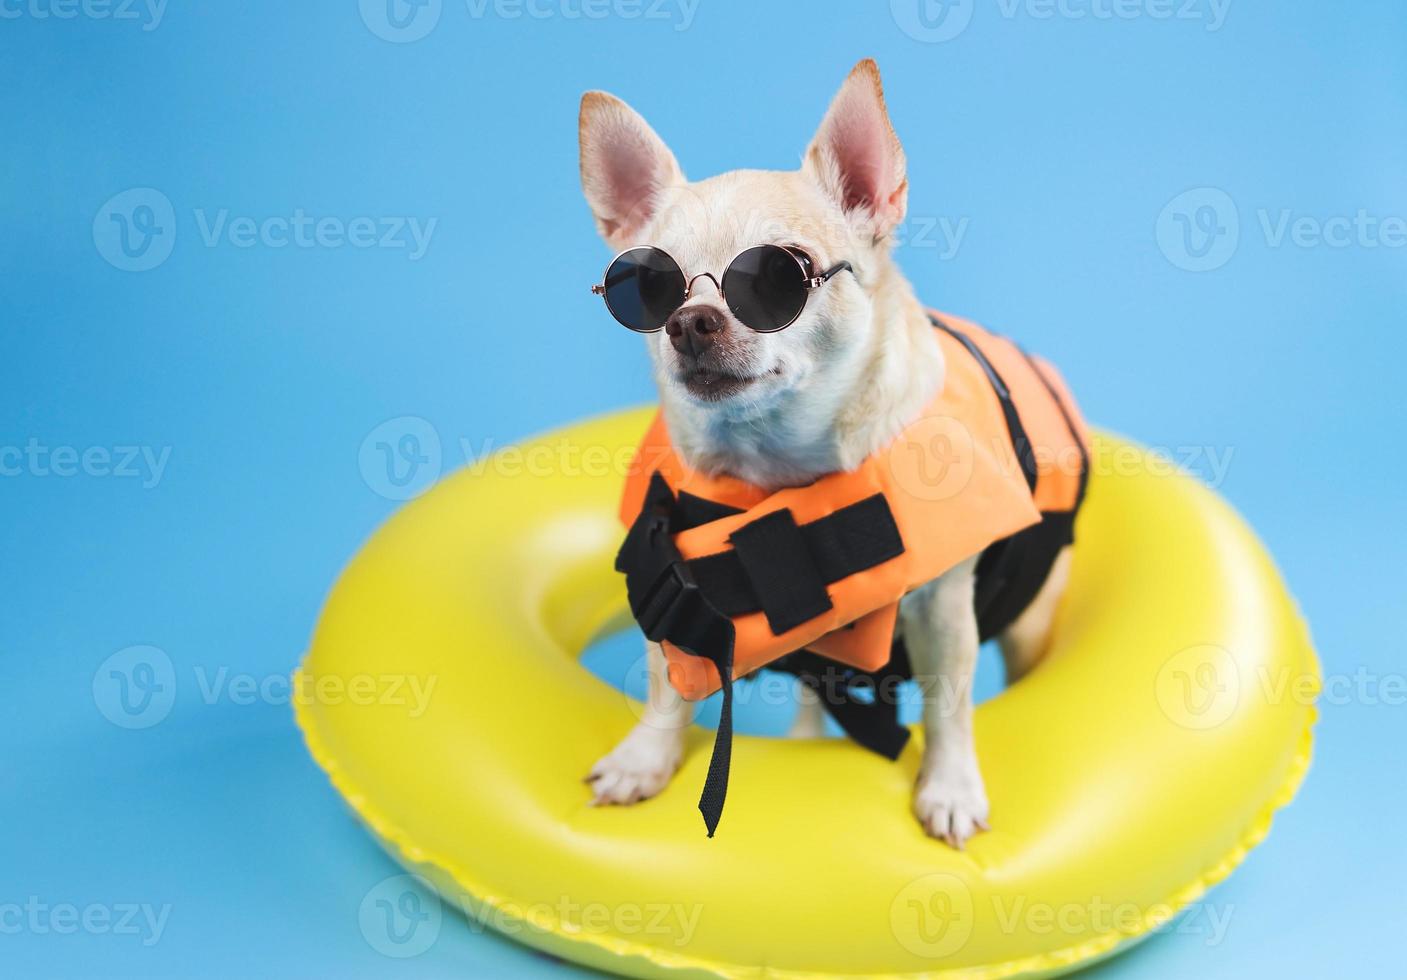 brown short hair chihuahua dog wearing sunglasses and  orange life jacket or life vest standing in yellow  swimming ring, looking at copy space,  isolated on blue background. photo